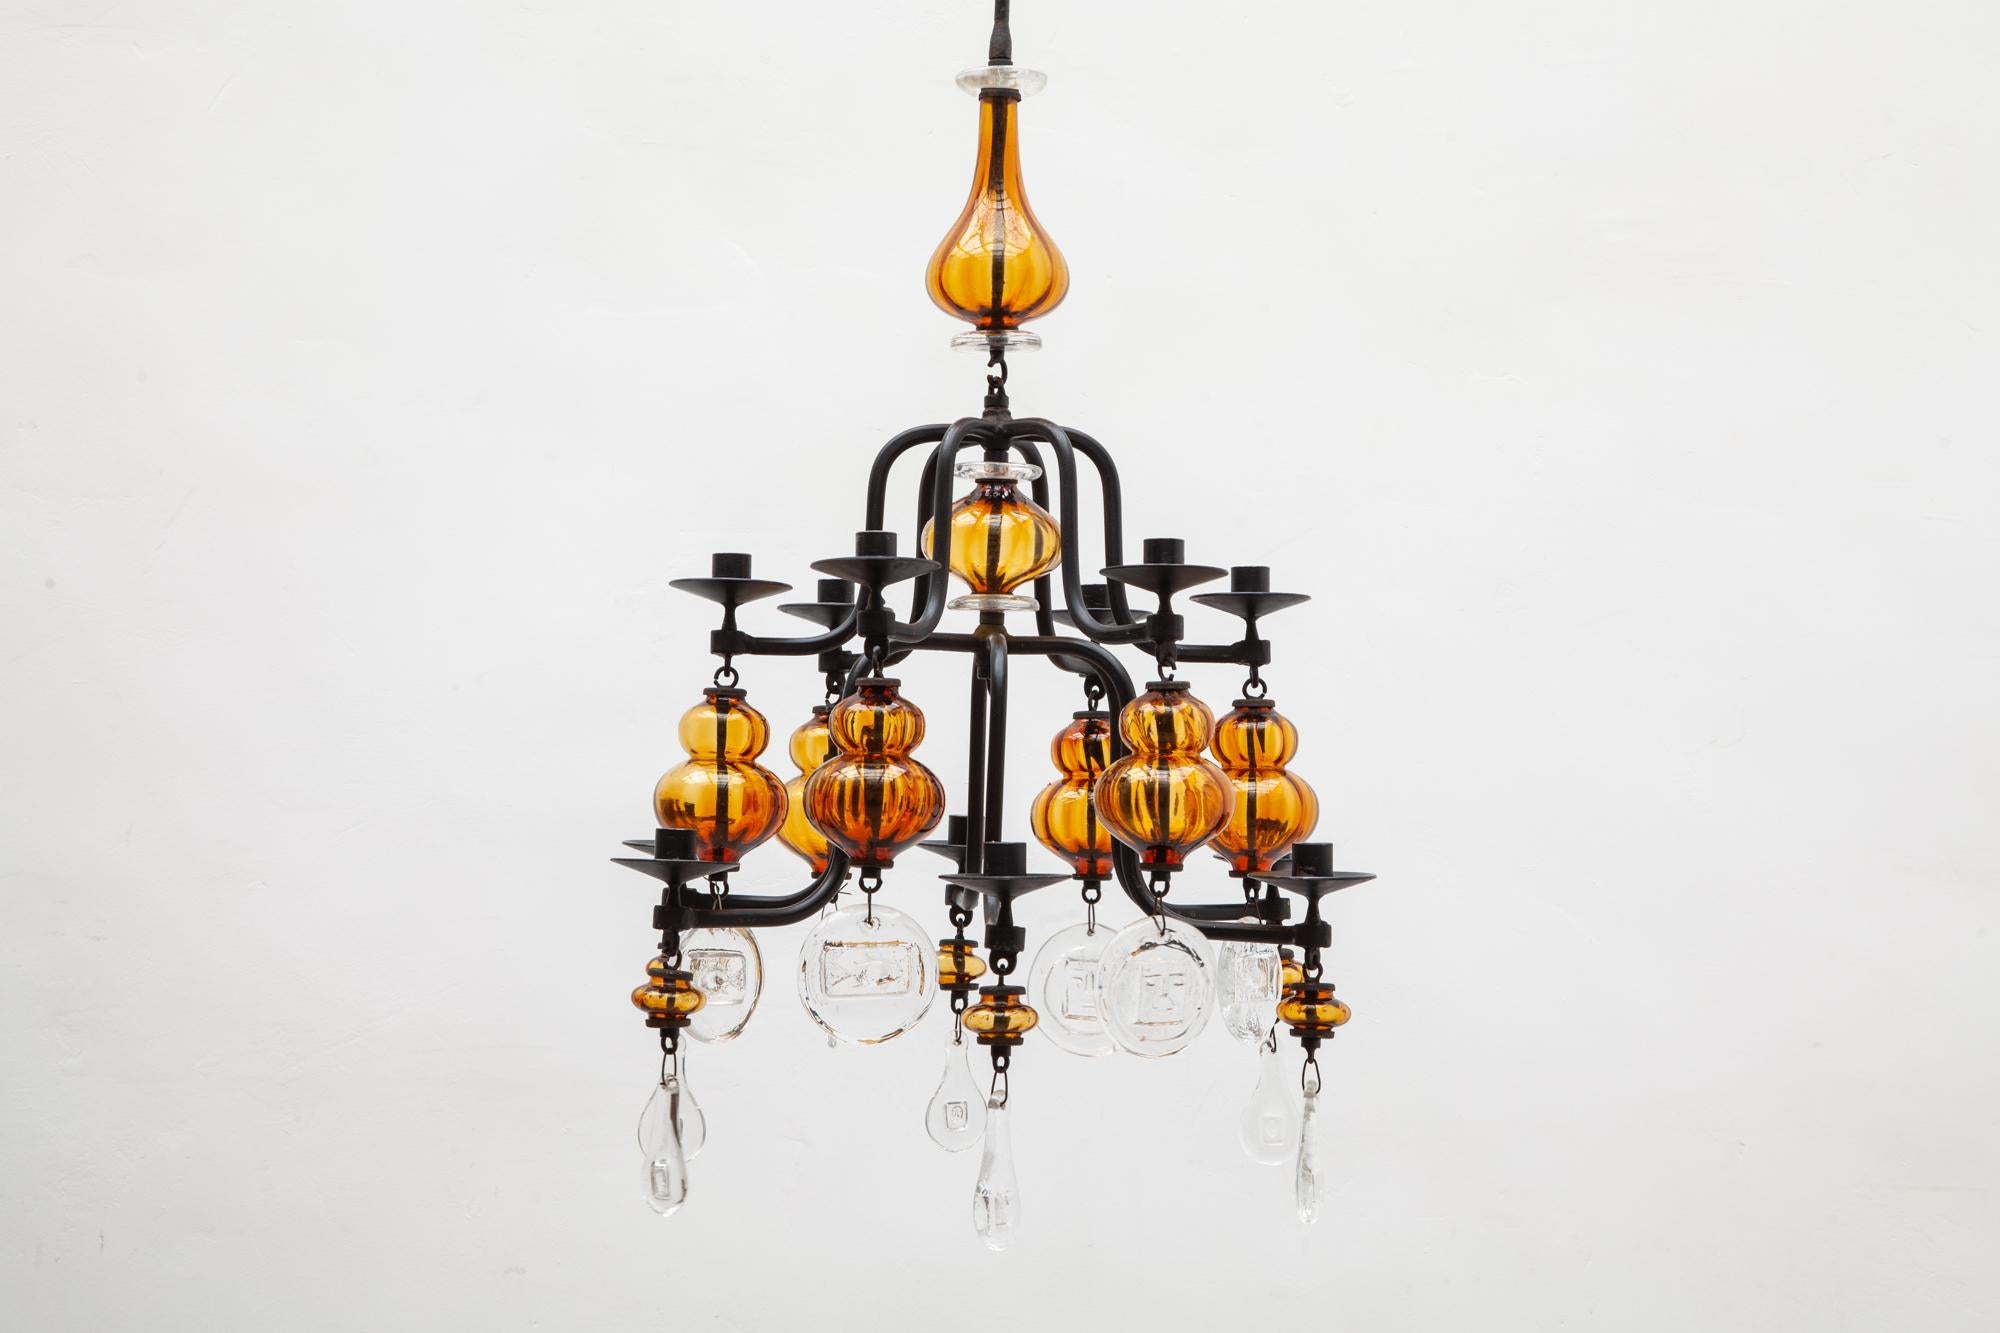 Wrought iron and clear glass 12-arm chandelier by Erik Hoglund, Boda. Cast iron, mouth-blown and pressed amber and clear glass 12-arm chandelier for 12 candles by Swedish designer Erik Hoglund with images of animals and faces. Boda Nova Glassworks,